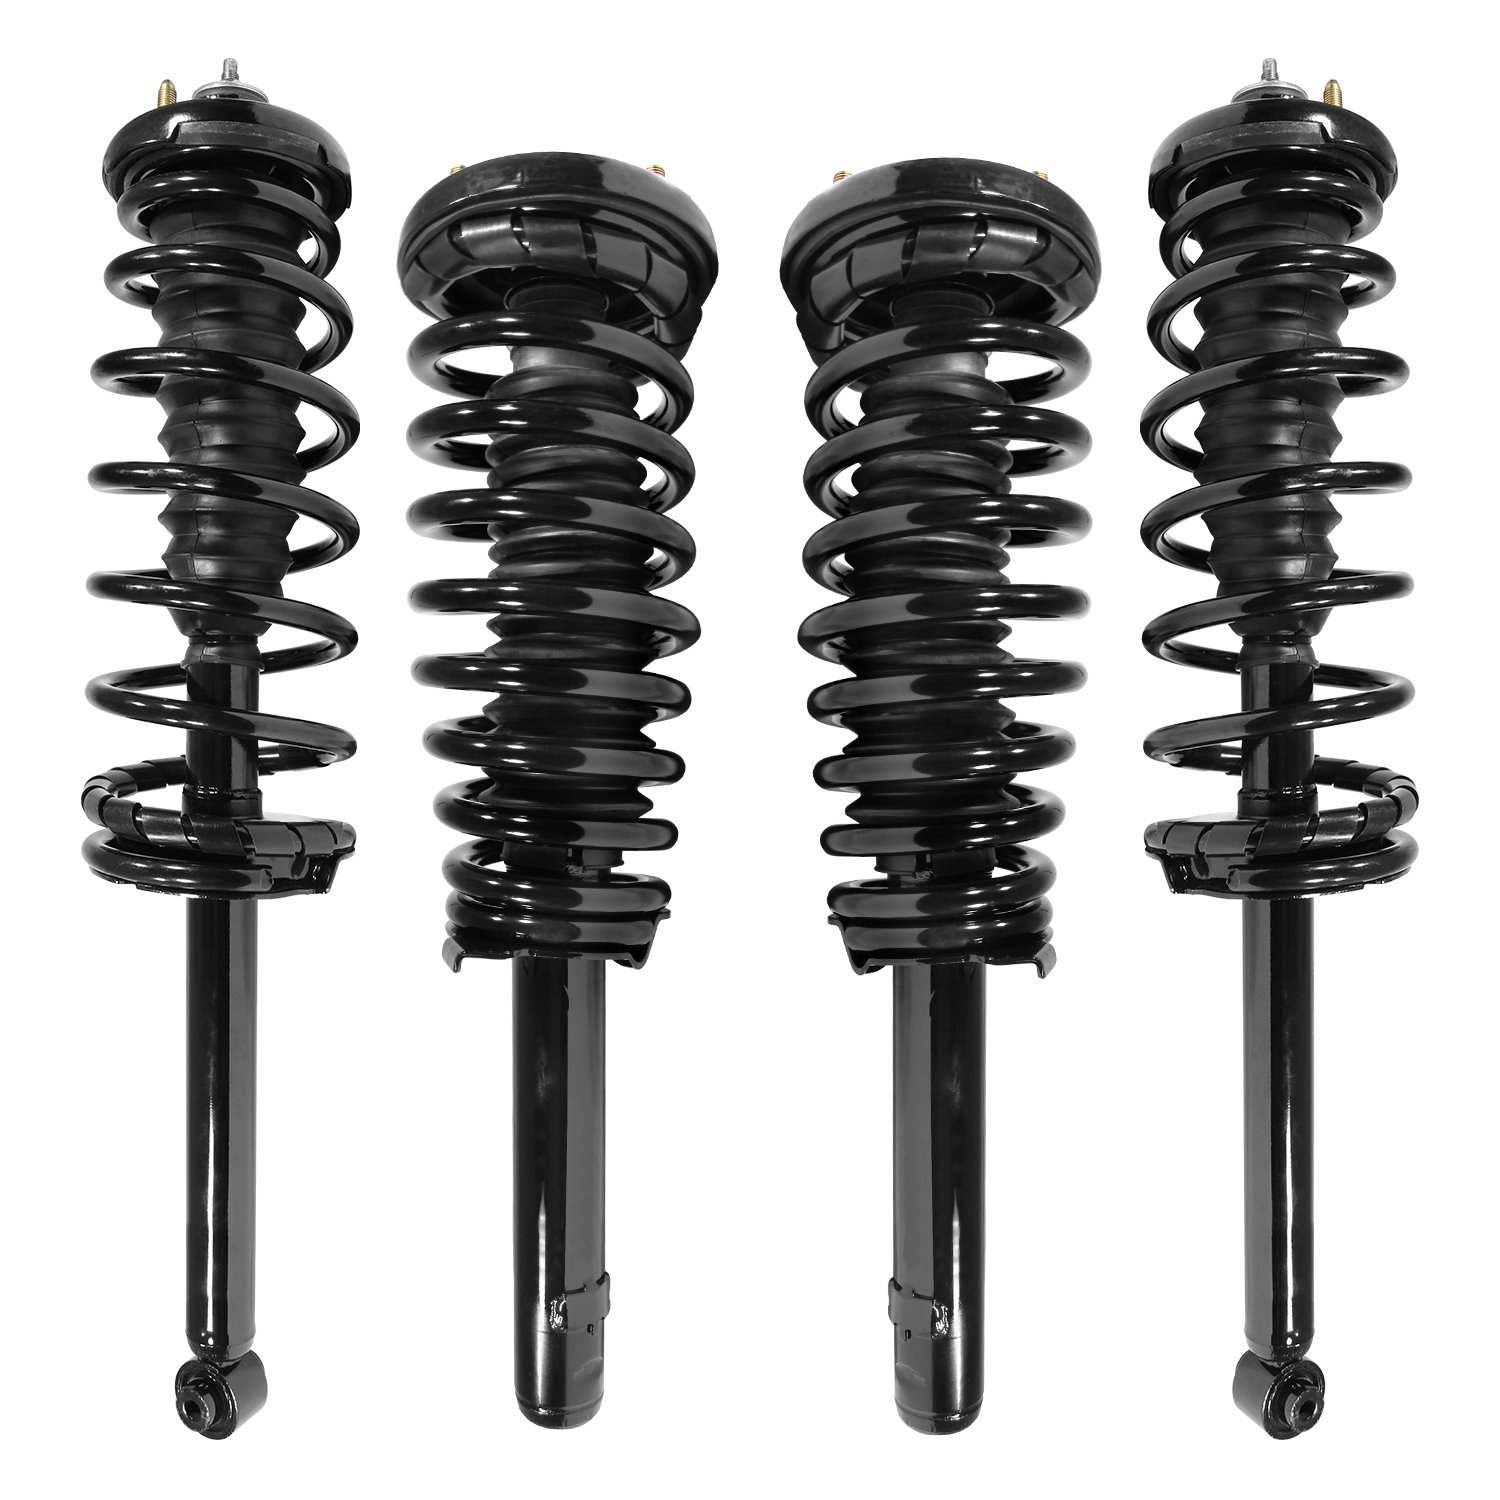 4-11091-15280-001 Front & Rear Suspension Strut & Coil Spring Assembly Kit Fits Select Acura CL, Honda Accord